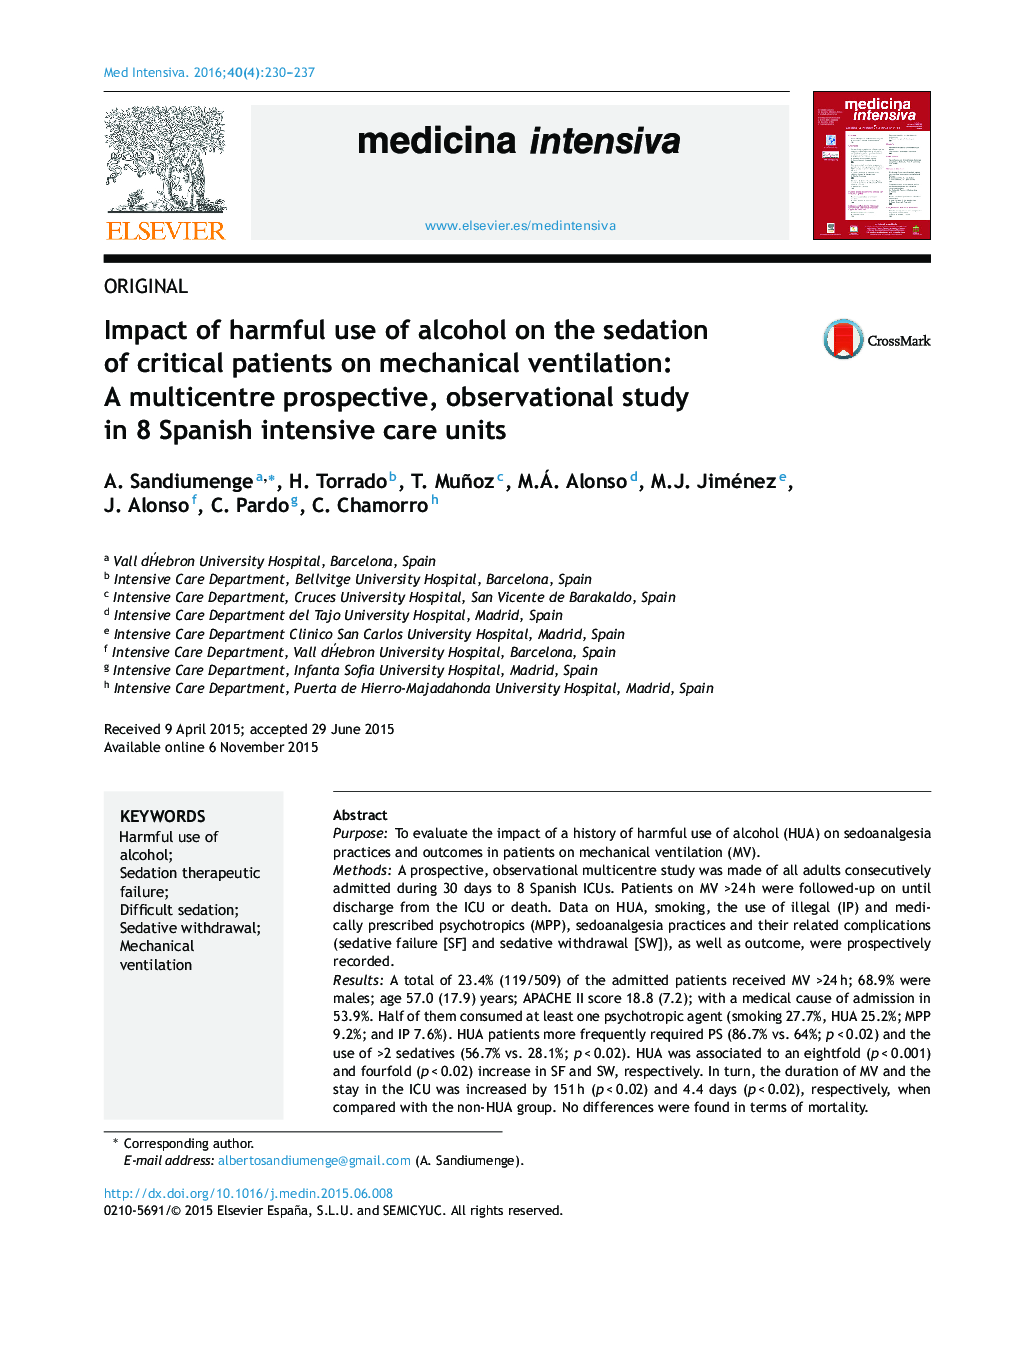 Impact of harmful use of alcohol on the sedation of critical patients on mechanical ventilation: A multicentre prospective, observational study in 8 Spanish intensive care units